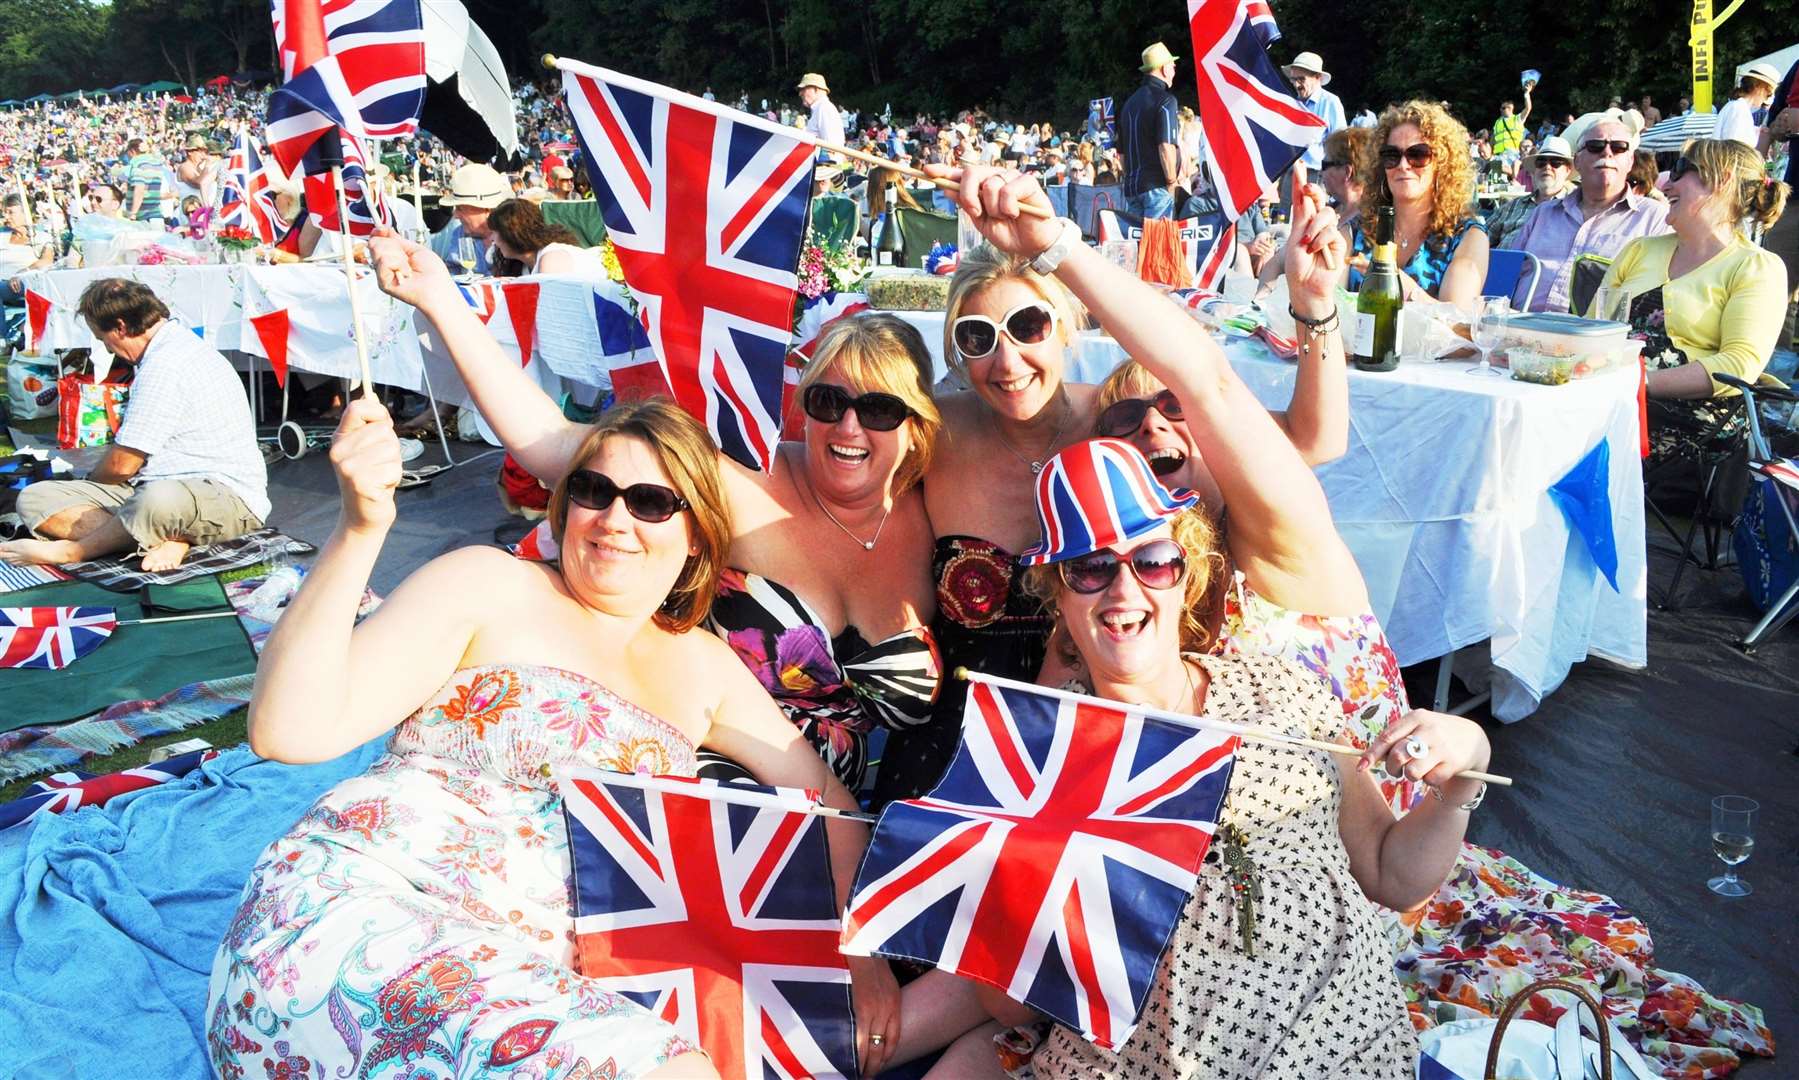 Thousands enjoy the atmosphere and spectacle of the Leeds Castle Concert each year